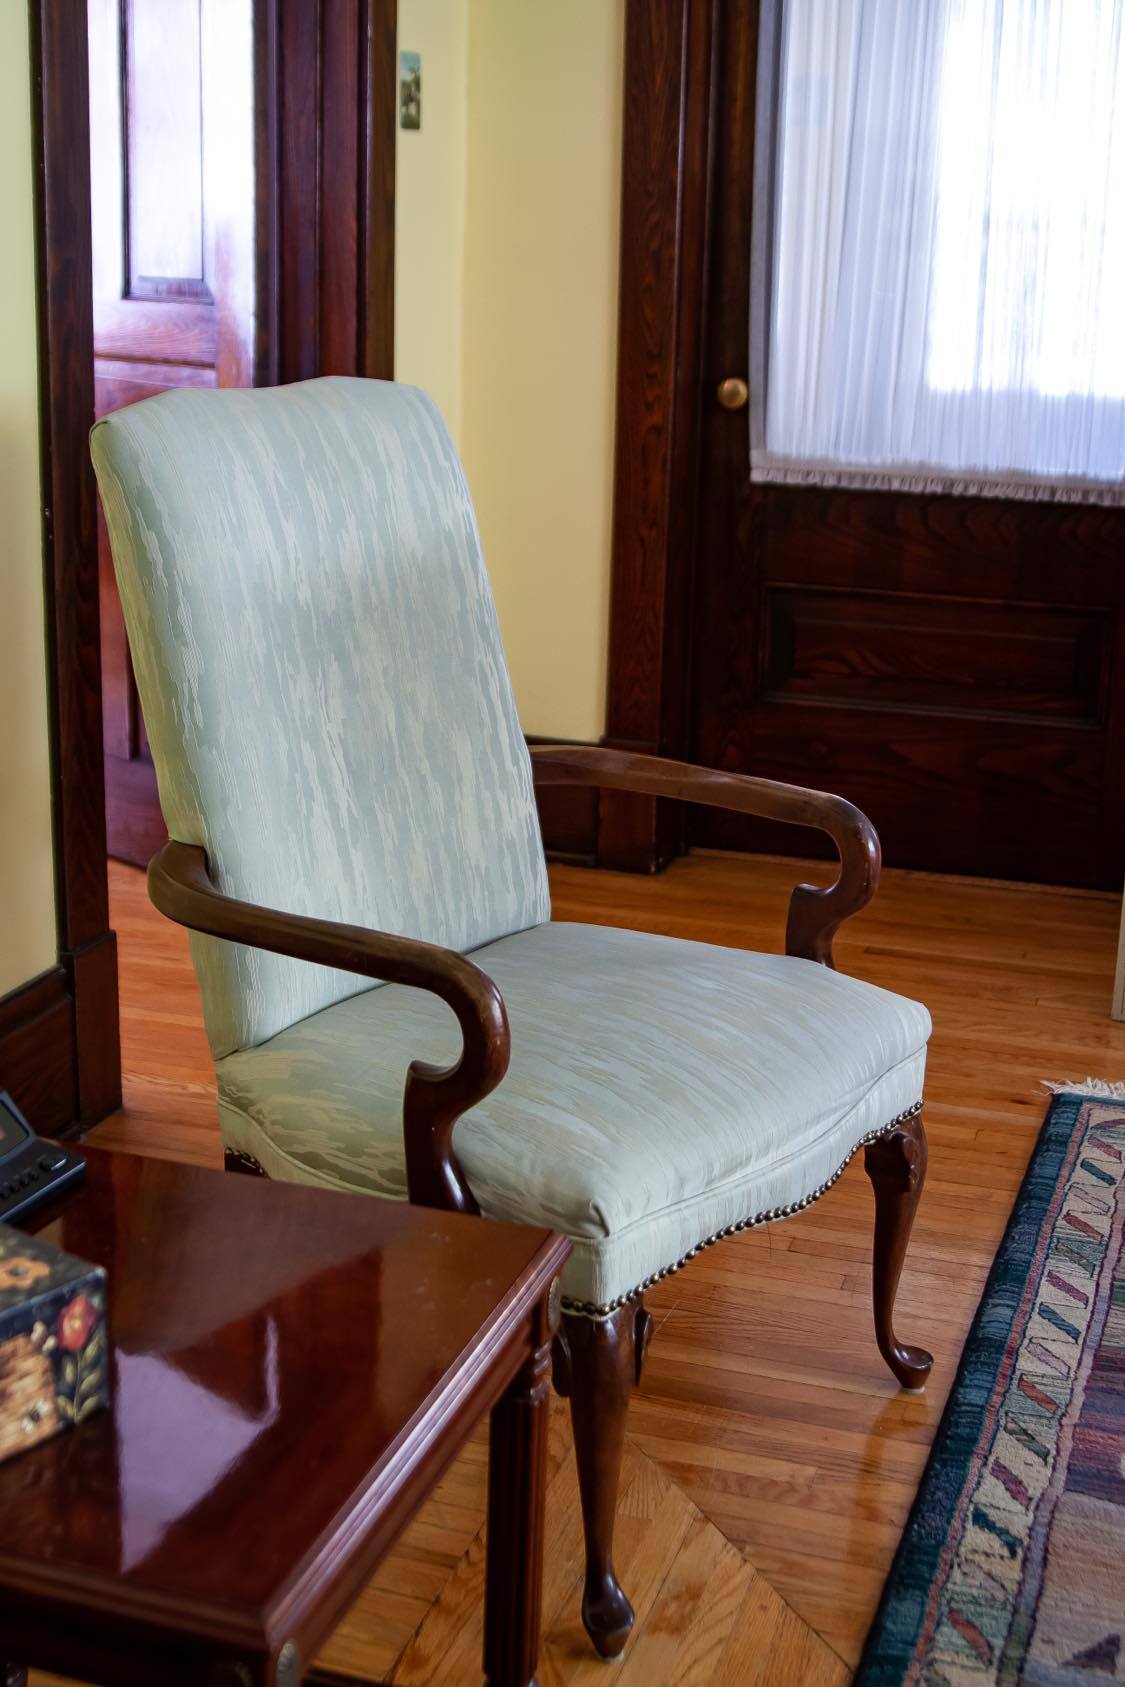 A chair inside Queenston Psychological services